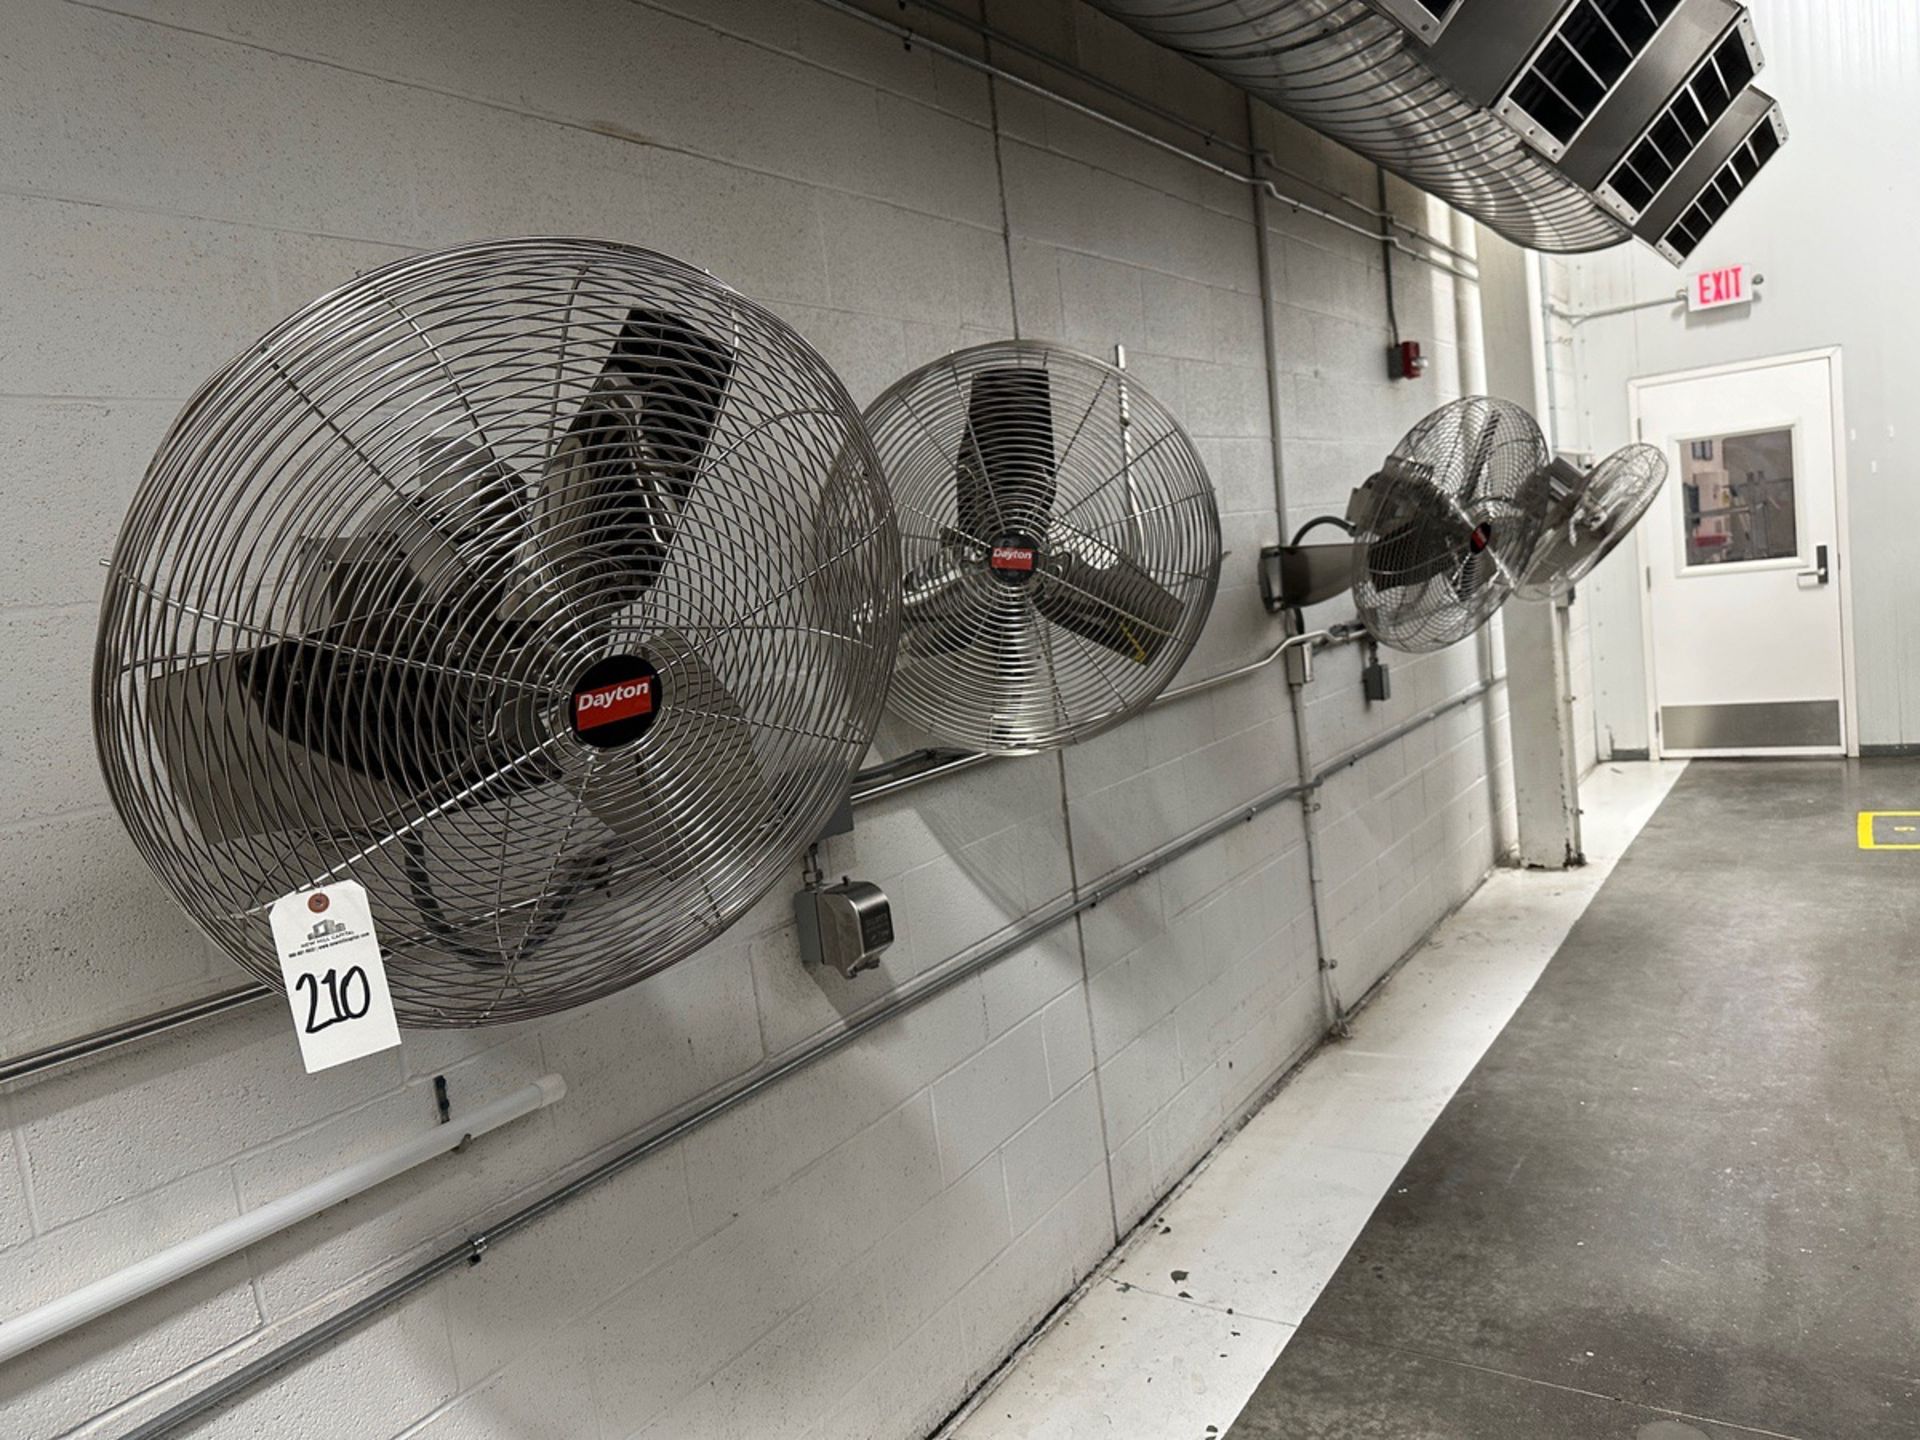 Lot of (4) 24" Dayton 1/4 HP Stainless Steel Wall Mounted Fans - Model E65152 | Rig Fee $200